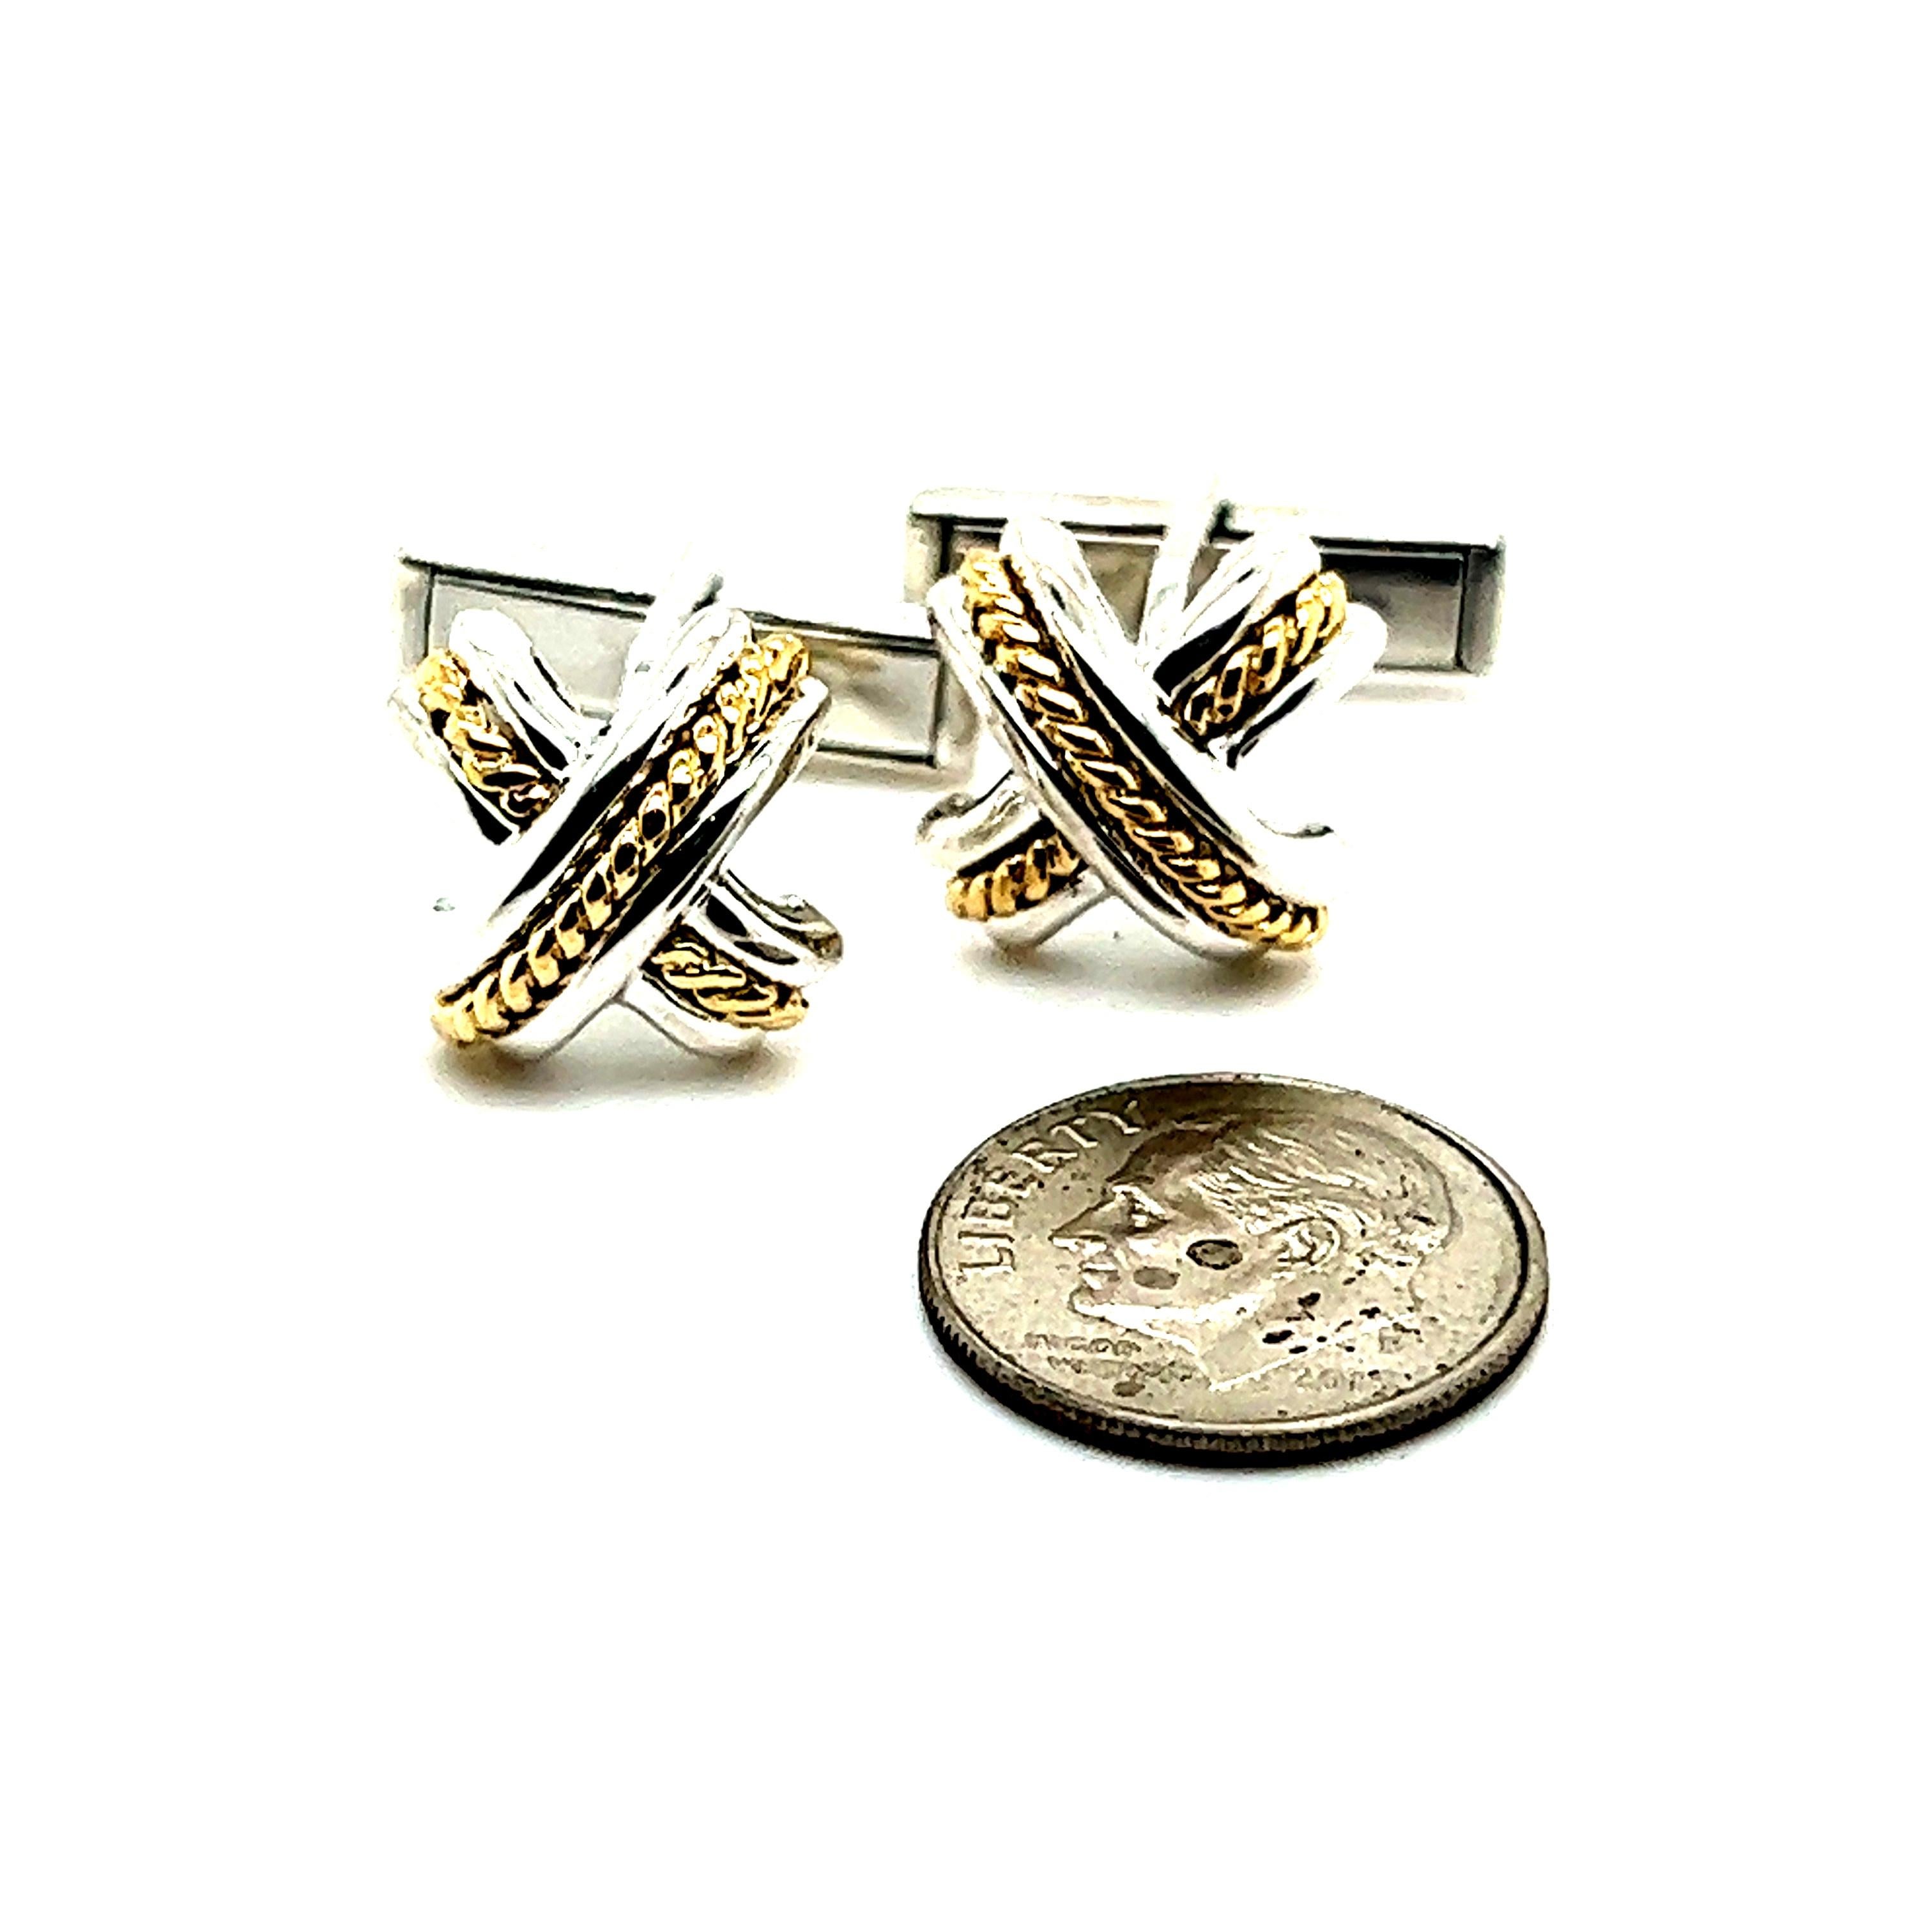 Tiffany & Co Estate Mens X Signature Cufflinks 18k Yellow Gold Sterling Silver TIF469

These elegant Authentic Tiffany & Co Men's Cufflinks are made of sterling silver and have a weight of 10.44 grams.

TRUSTED SELLER SINCE 2002

PLEASE SEE OUR